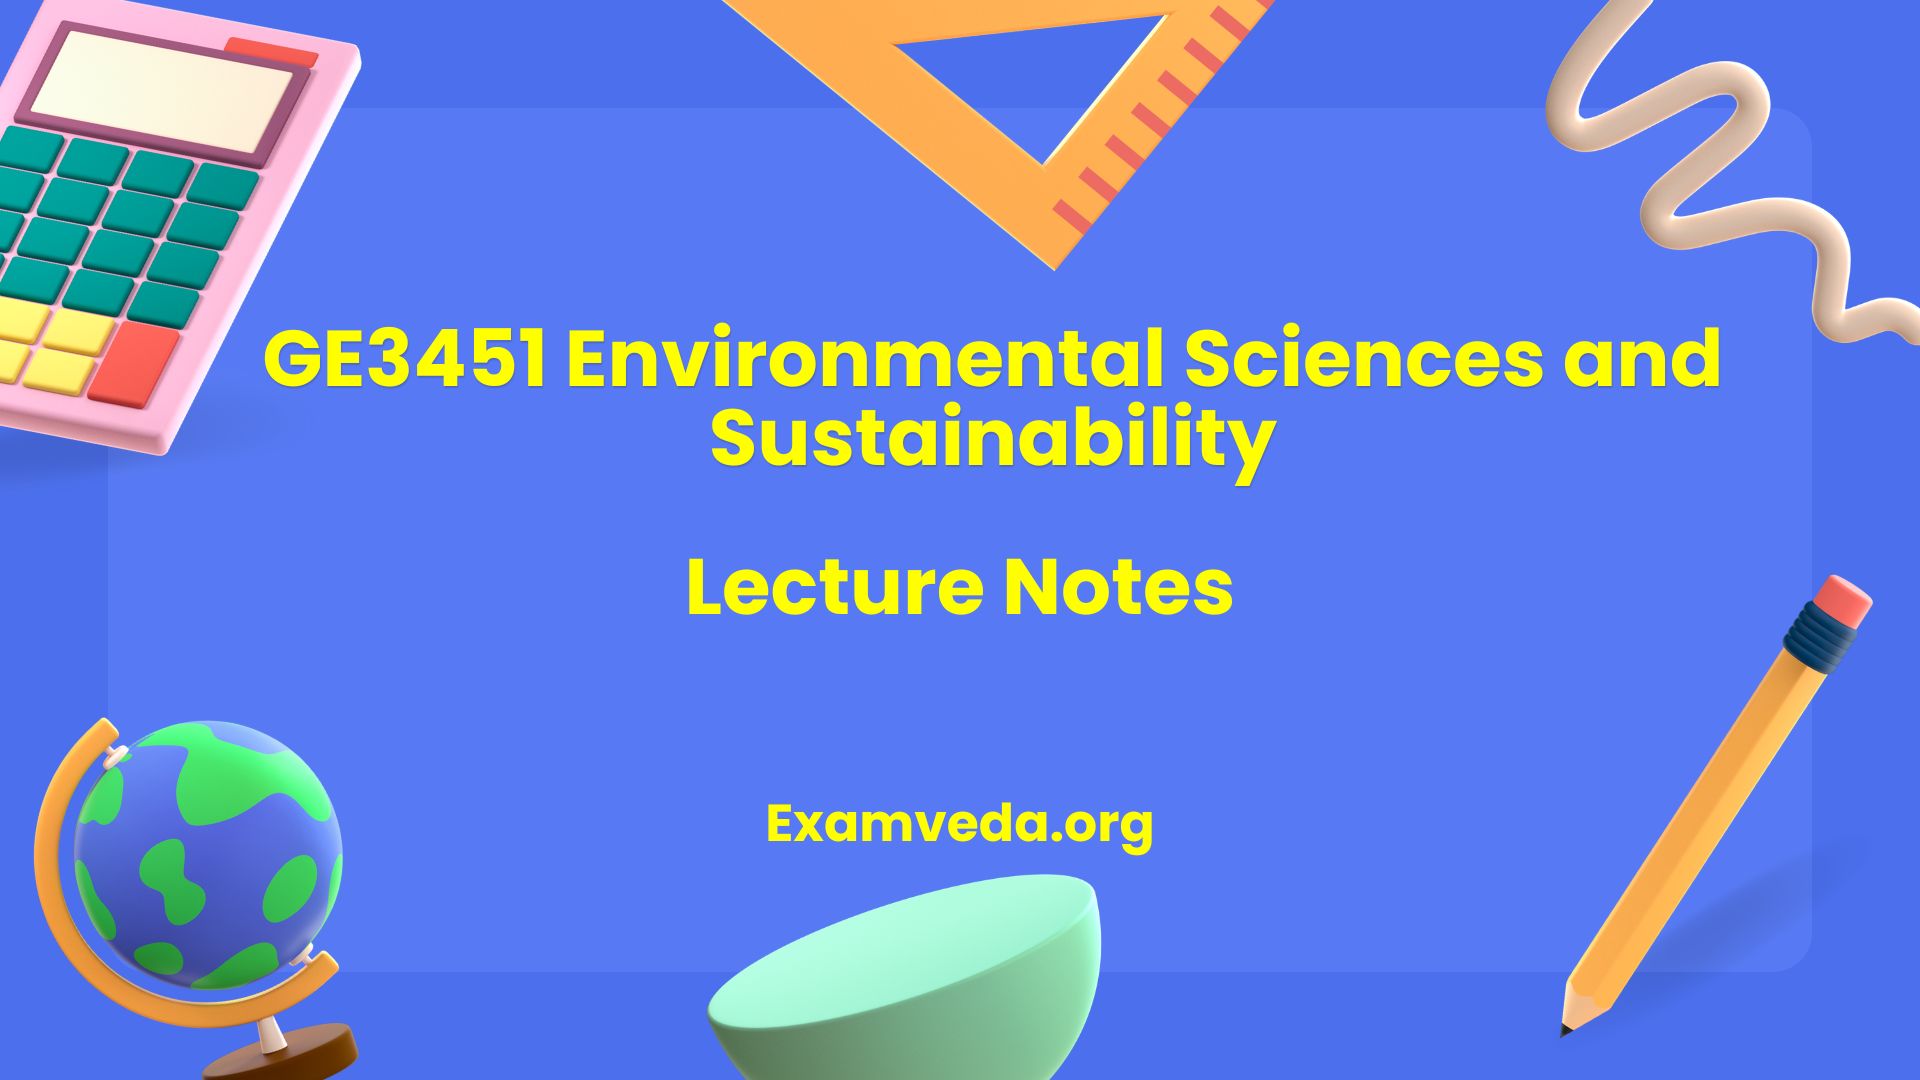 GE3451 Environmental Sciences and Sustainability Lecture Notes